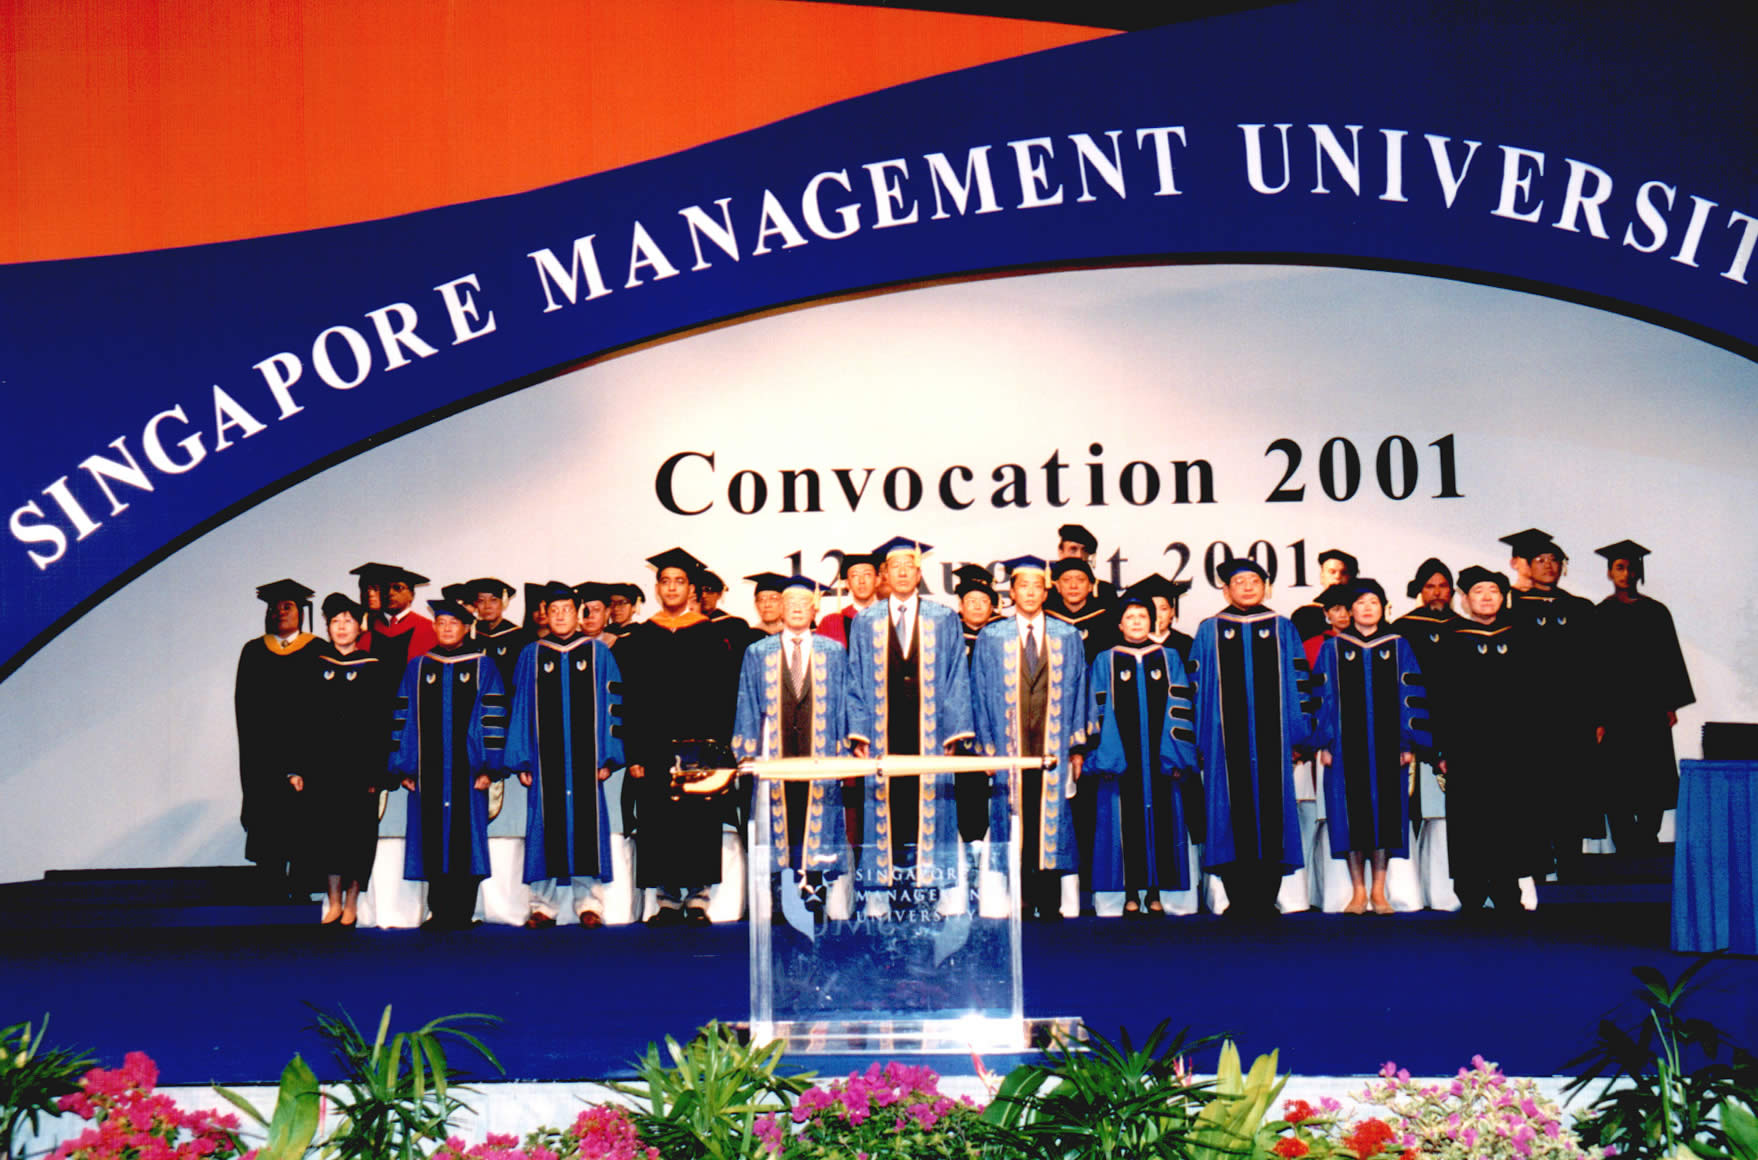 School of Economics and Social Sciences Announced at Convocation 2001